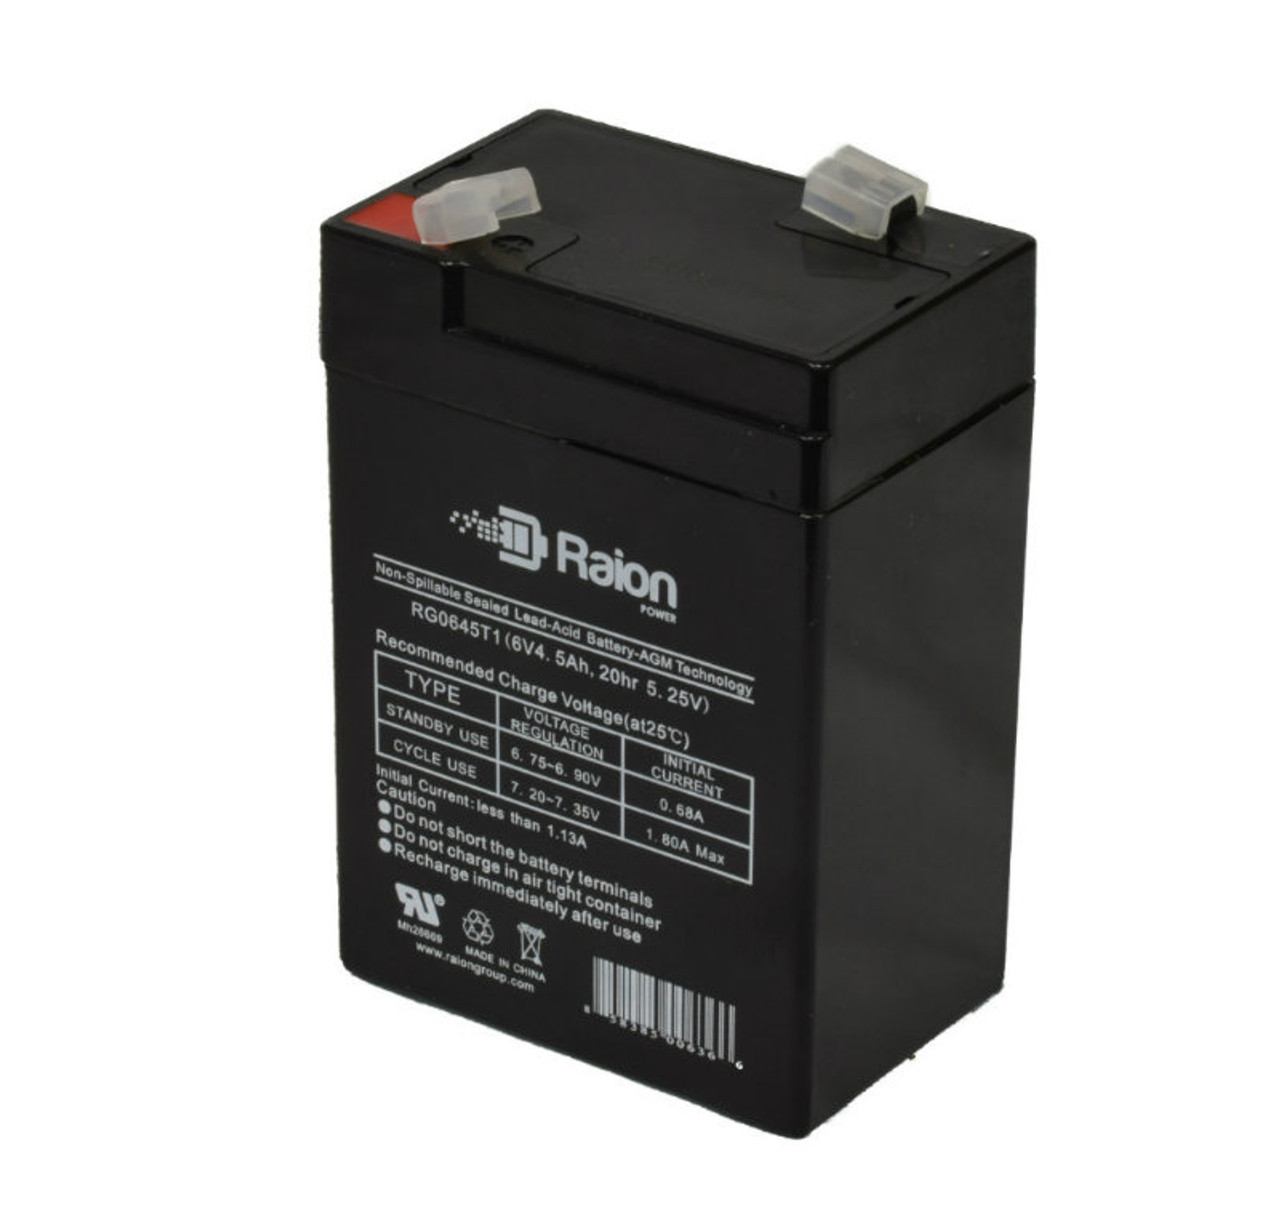 Raion Power RG0645T1 6V 4.5Ah Replacement Battery Cartridge for Double Tech DB6-4